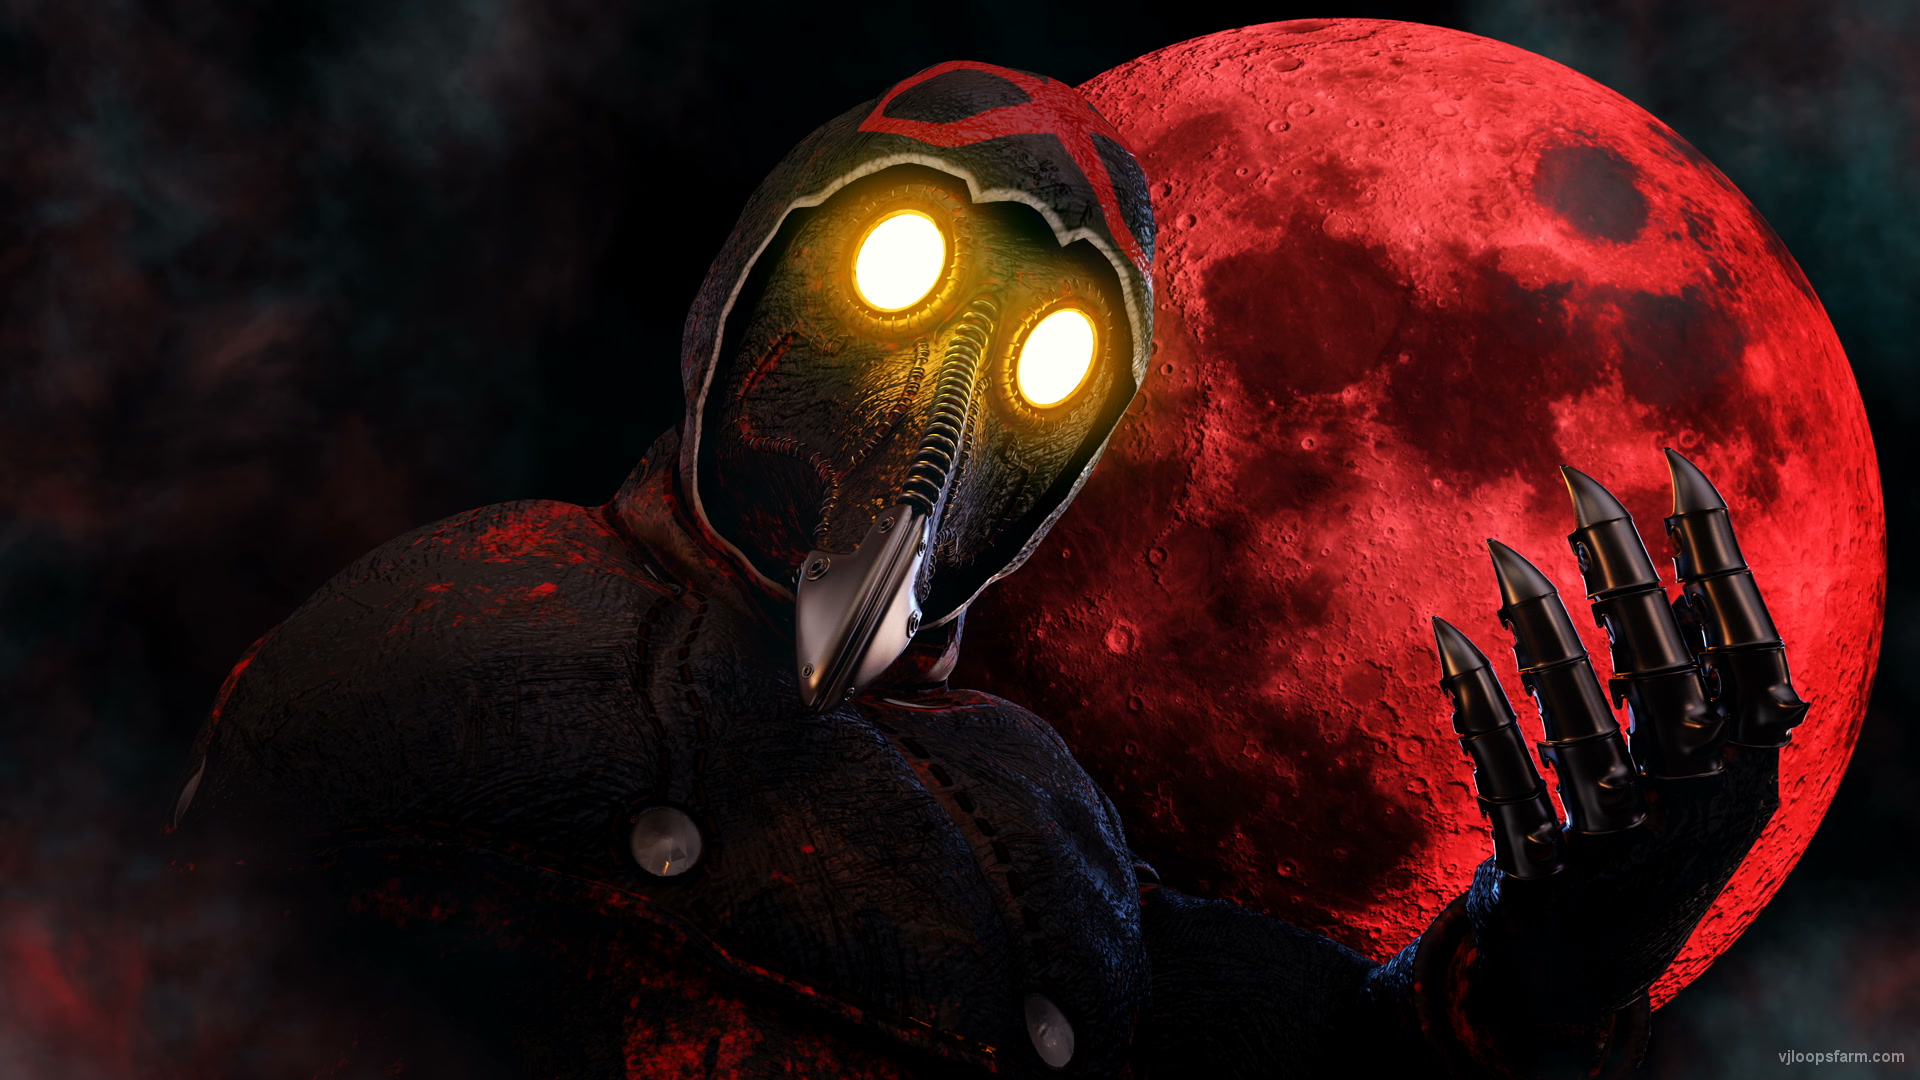 Idle scarry fingers by moon plague doctor video wallpaper